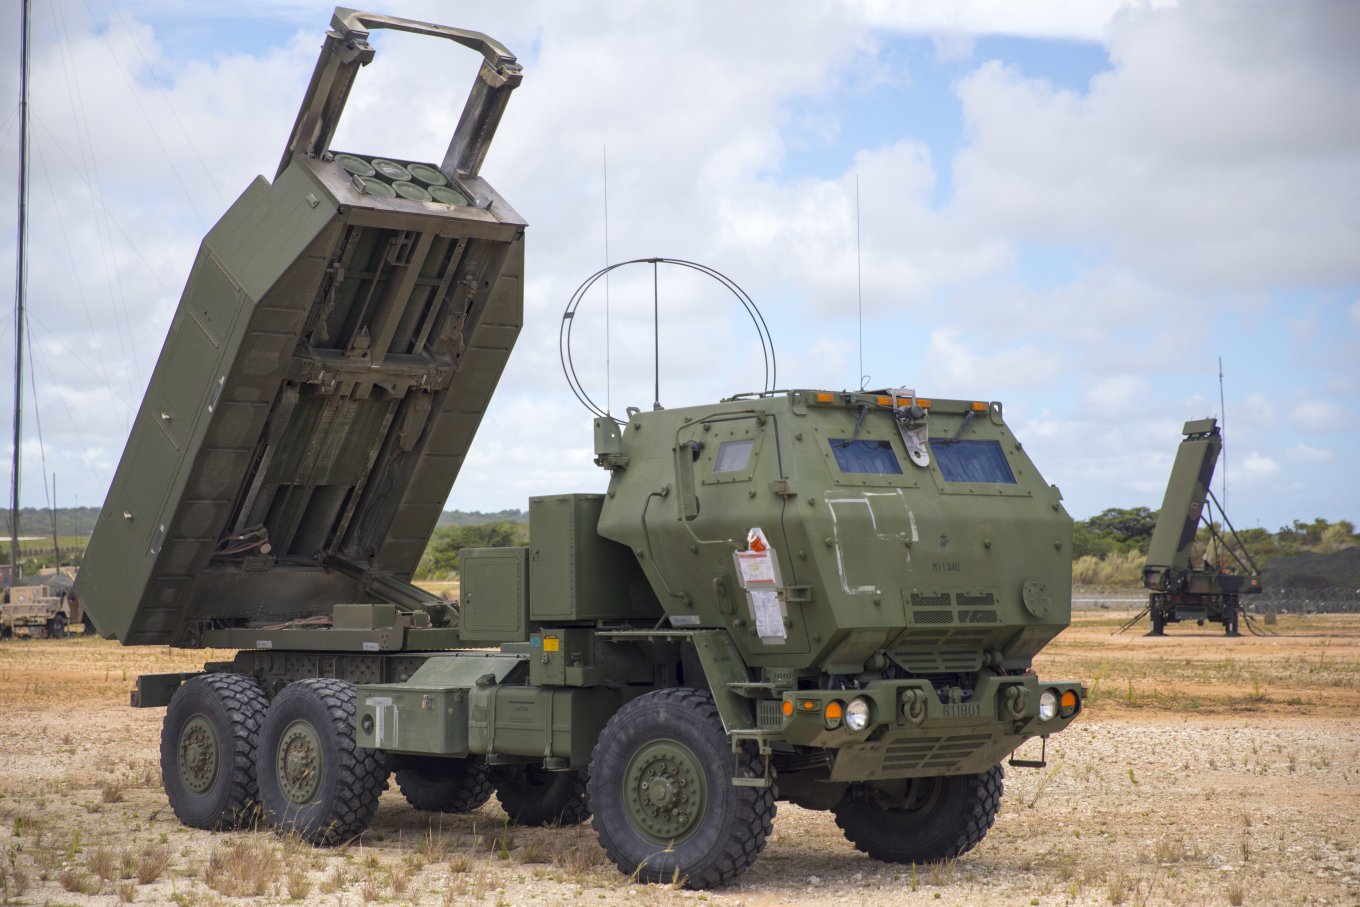 the Pentagon Explained What Complicates to Send More, Defense Express, Ukrainian Armed Forces CinC Says M142 HIMARS is Helping Stabilize Frontline with russians